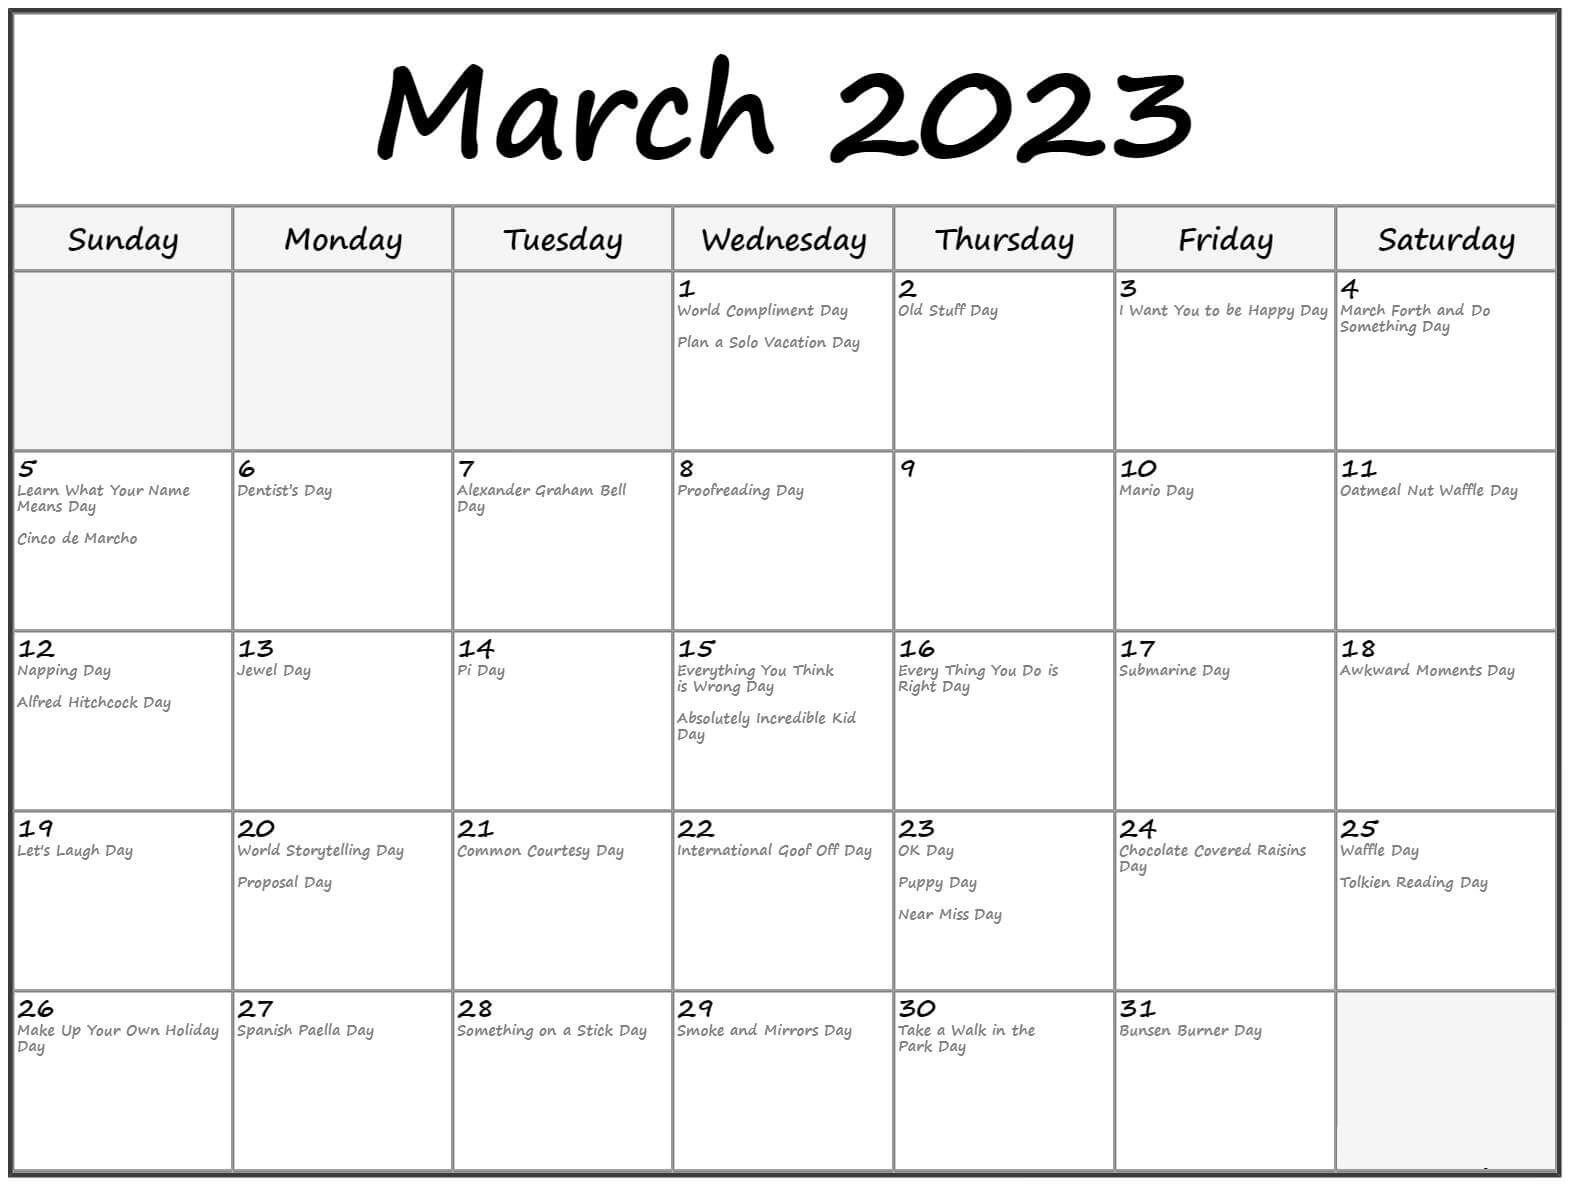 2023 March Holidays Calendar with Notes